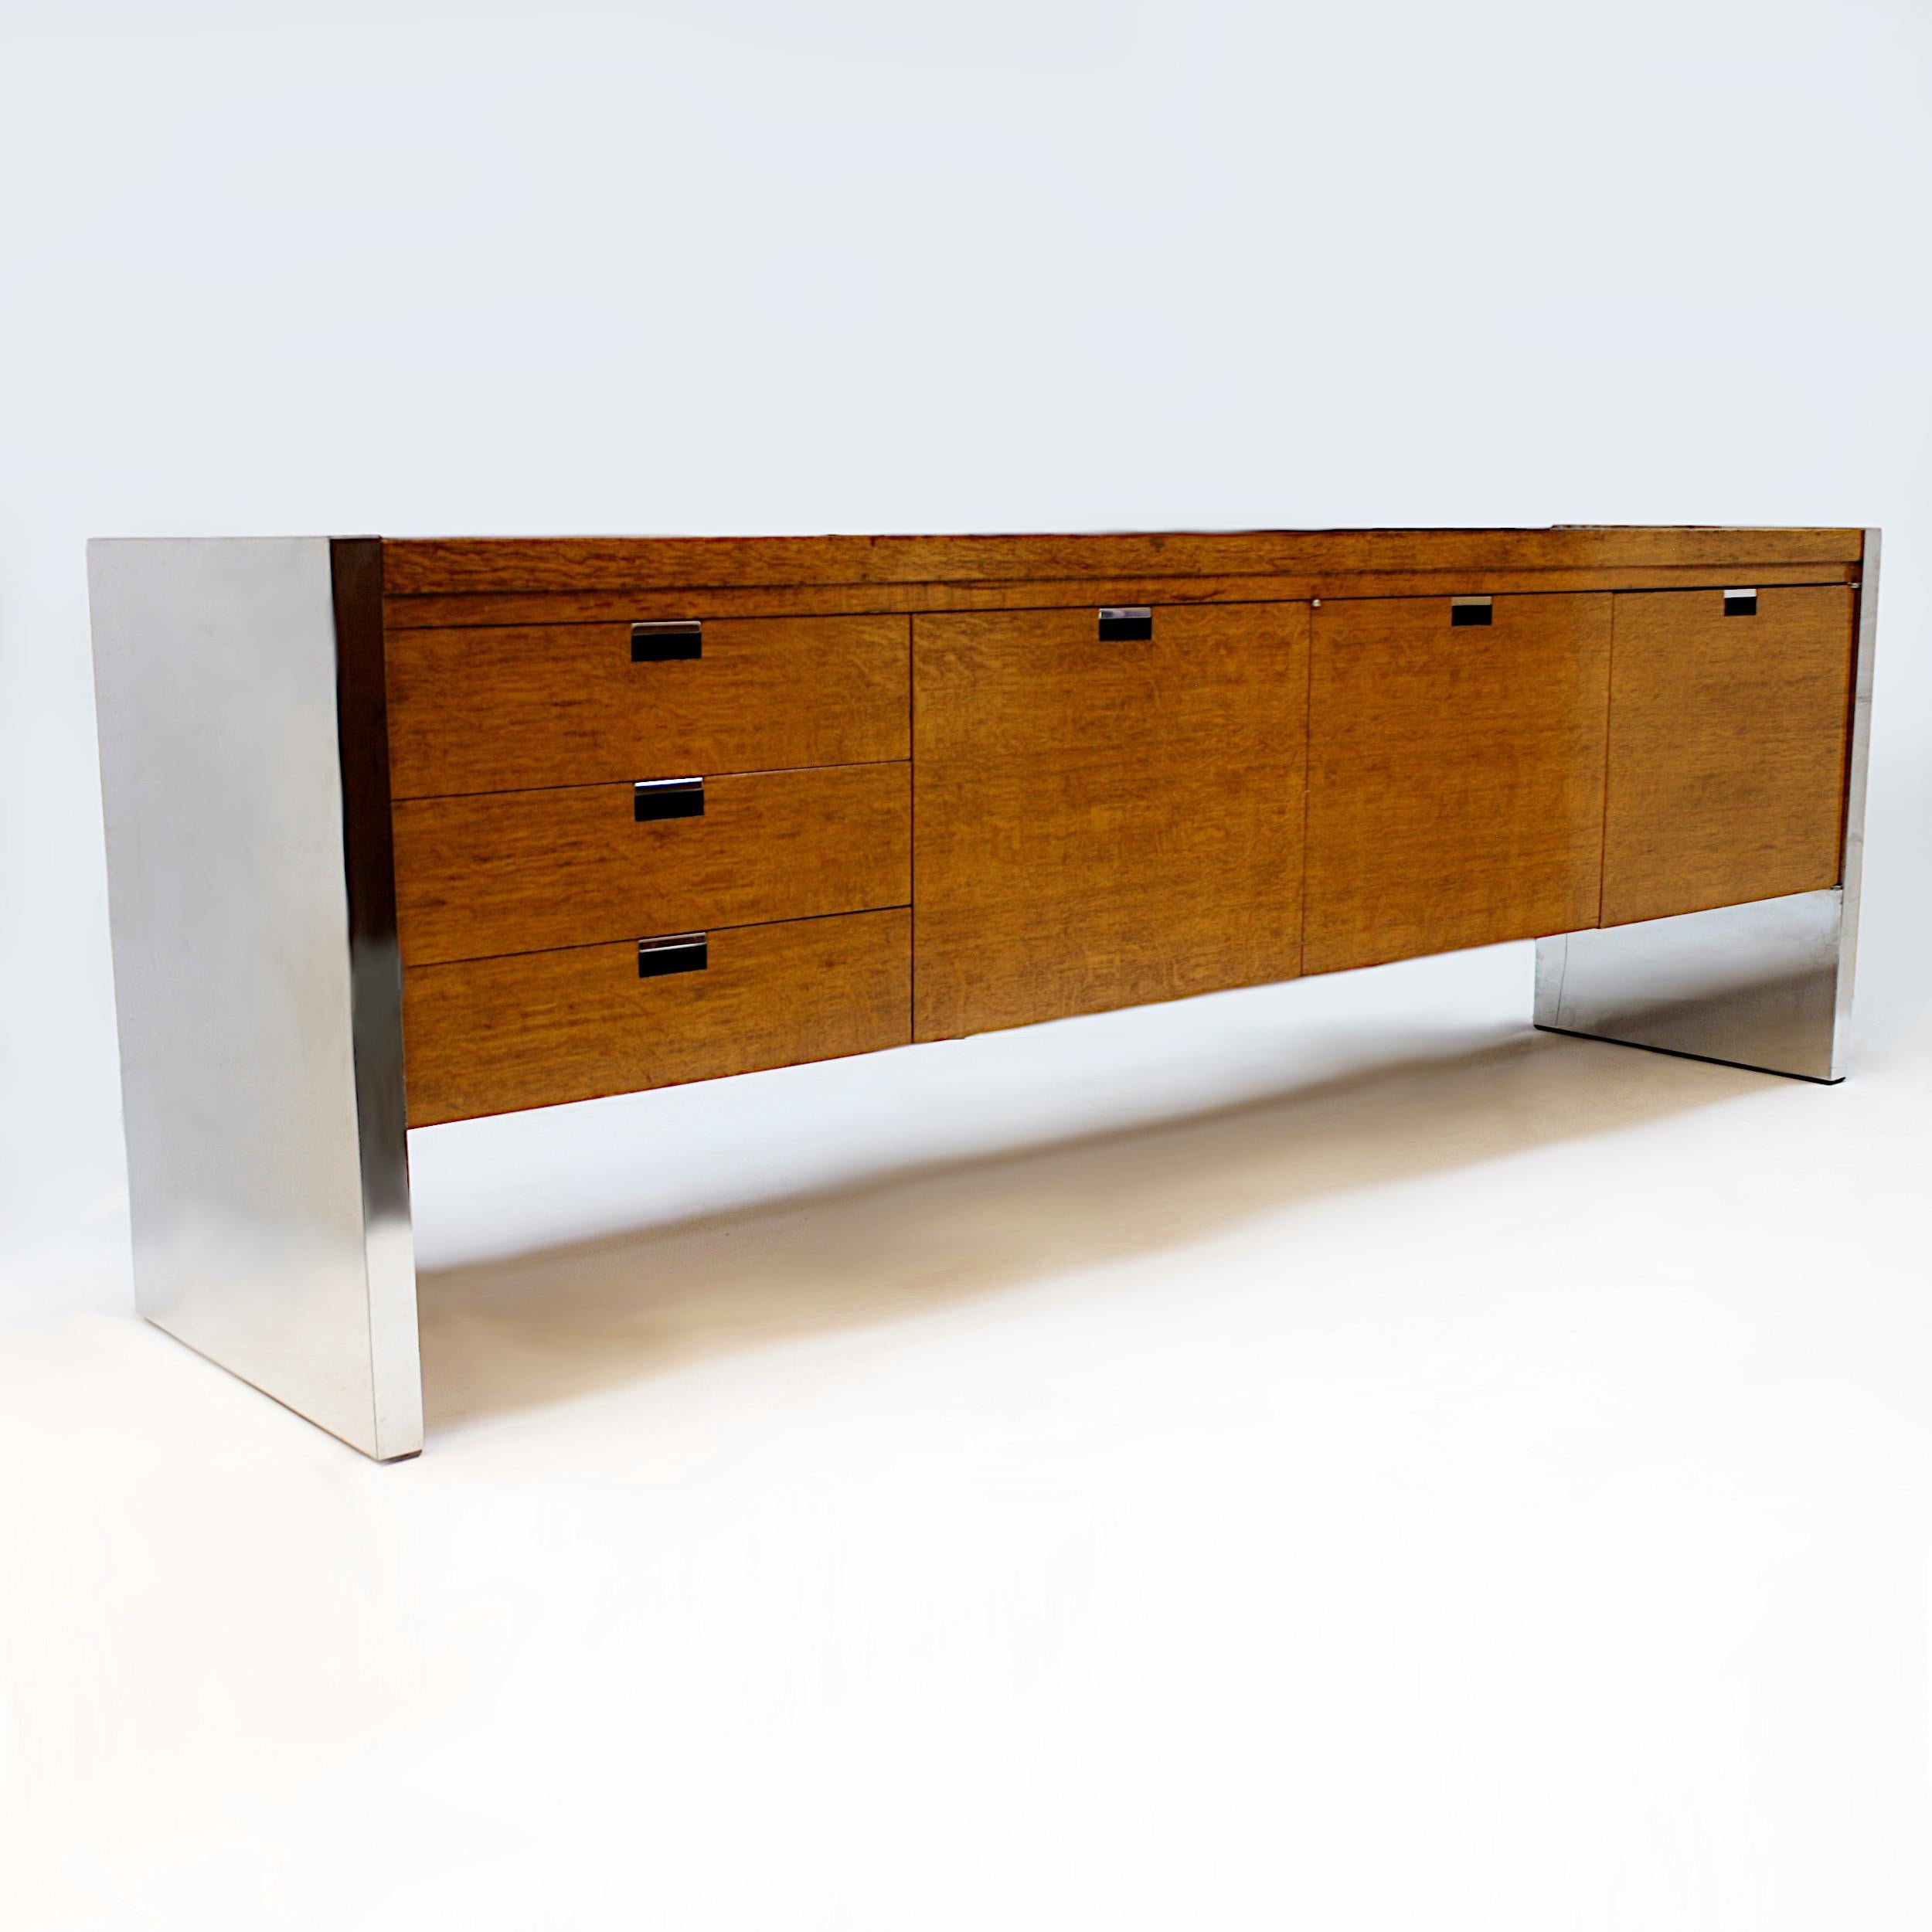 Impressive 1970s Credenza designed by Roger Sprunger for Dunbar. Credenza features gorgeous curly oak veneer, chrome ends, chrome pulls, and a wonderful minimalist design. This would make an excellent TV stand/console or would be right at home in an